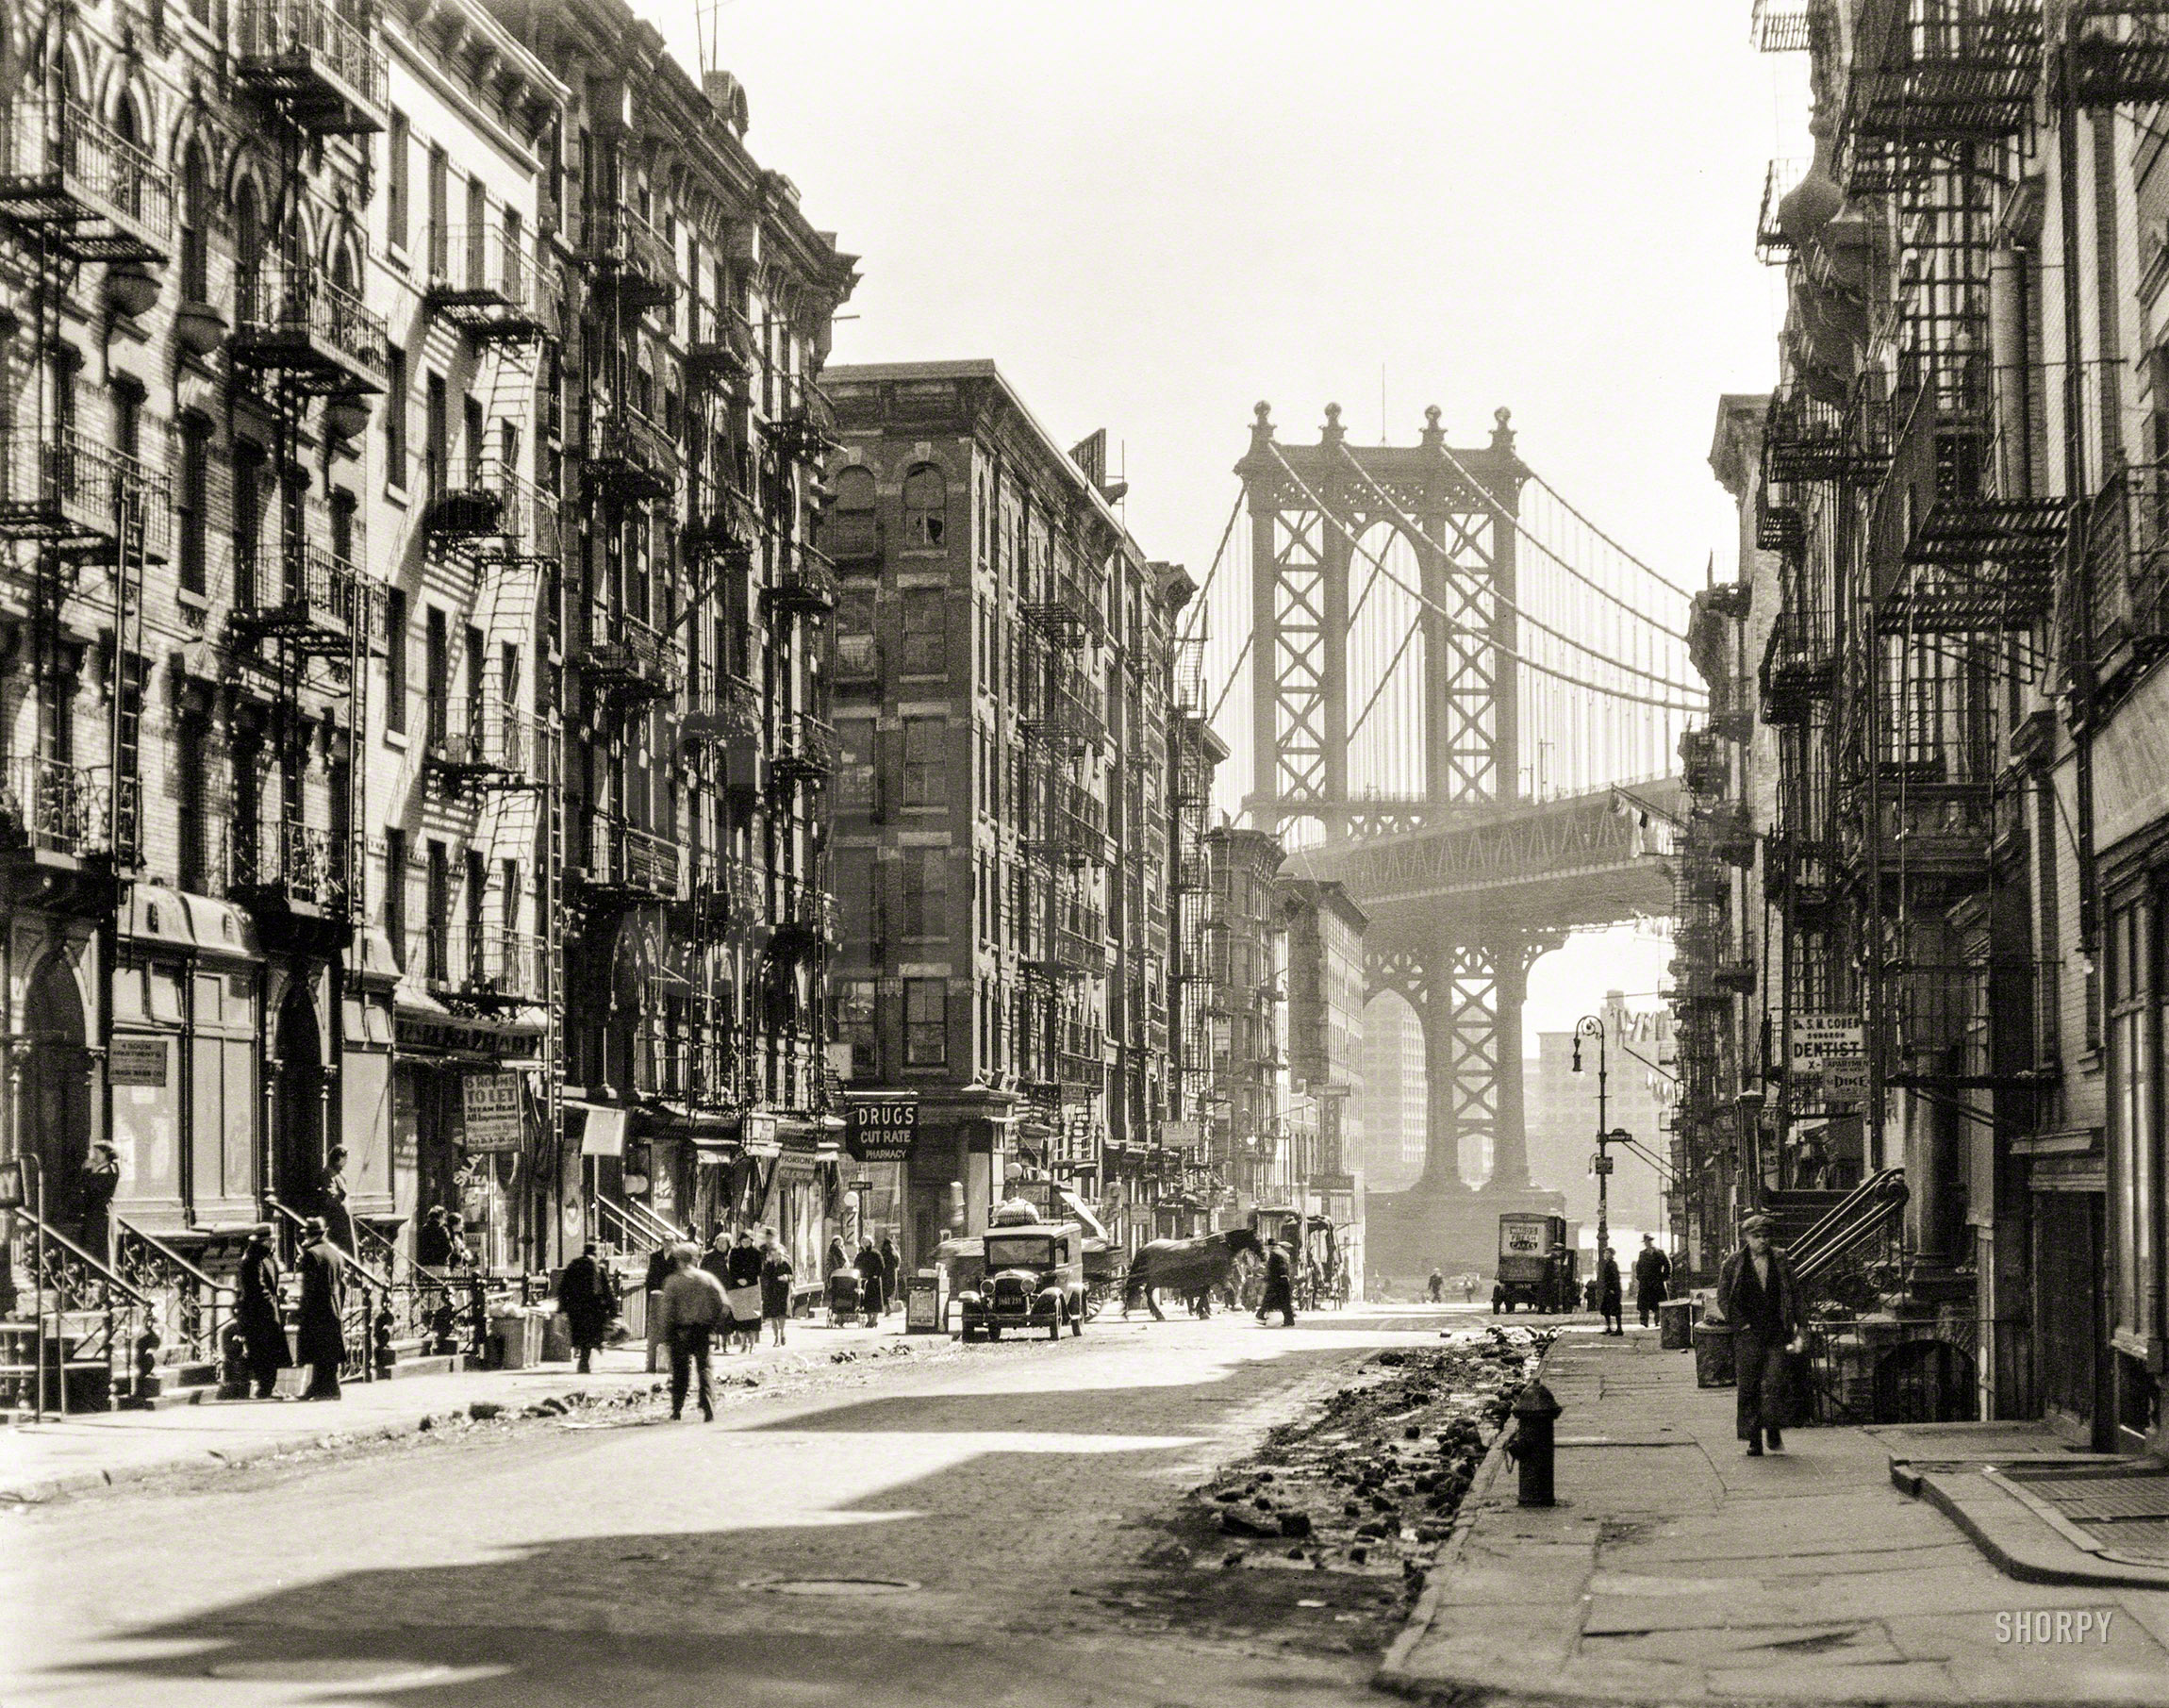 March 6, 1936. "Looking down Pike Street toward the Manhattan Bridge, street half in shadow, rubble in gutters, some traffic." 8x10 gelatin silver print by Berenice Abbott for the Federal Art Project. View full size.